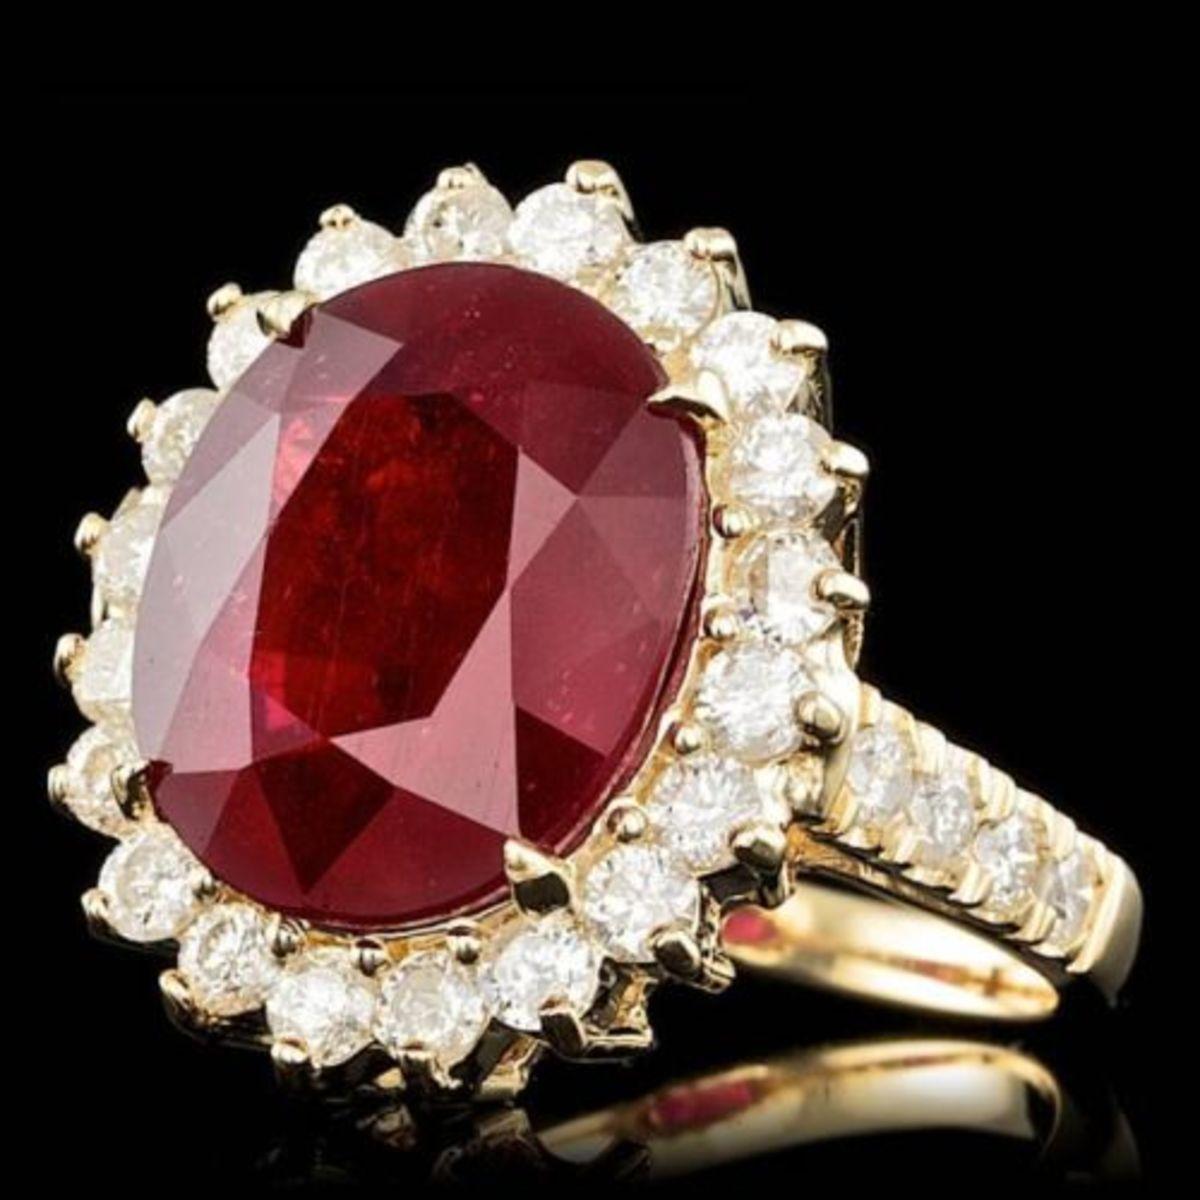 14K Yellow Gold 9.85ct Ruby and 1.34ct Diamond Ring